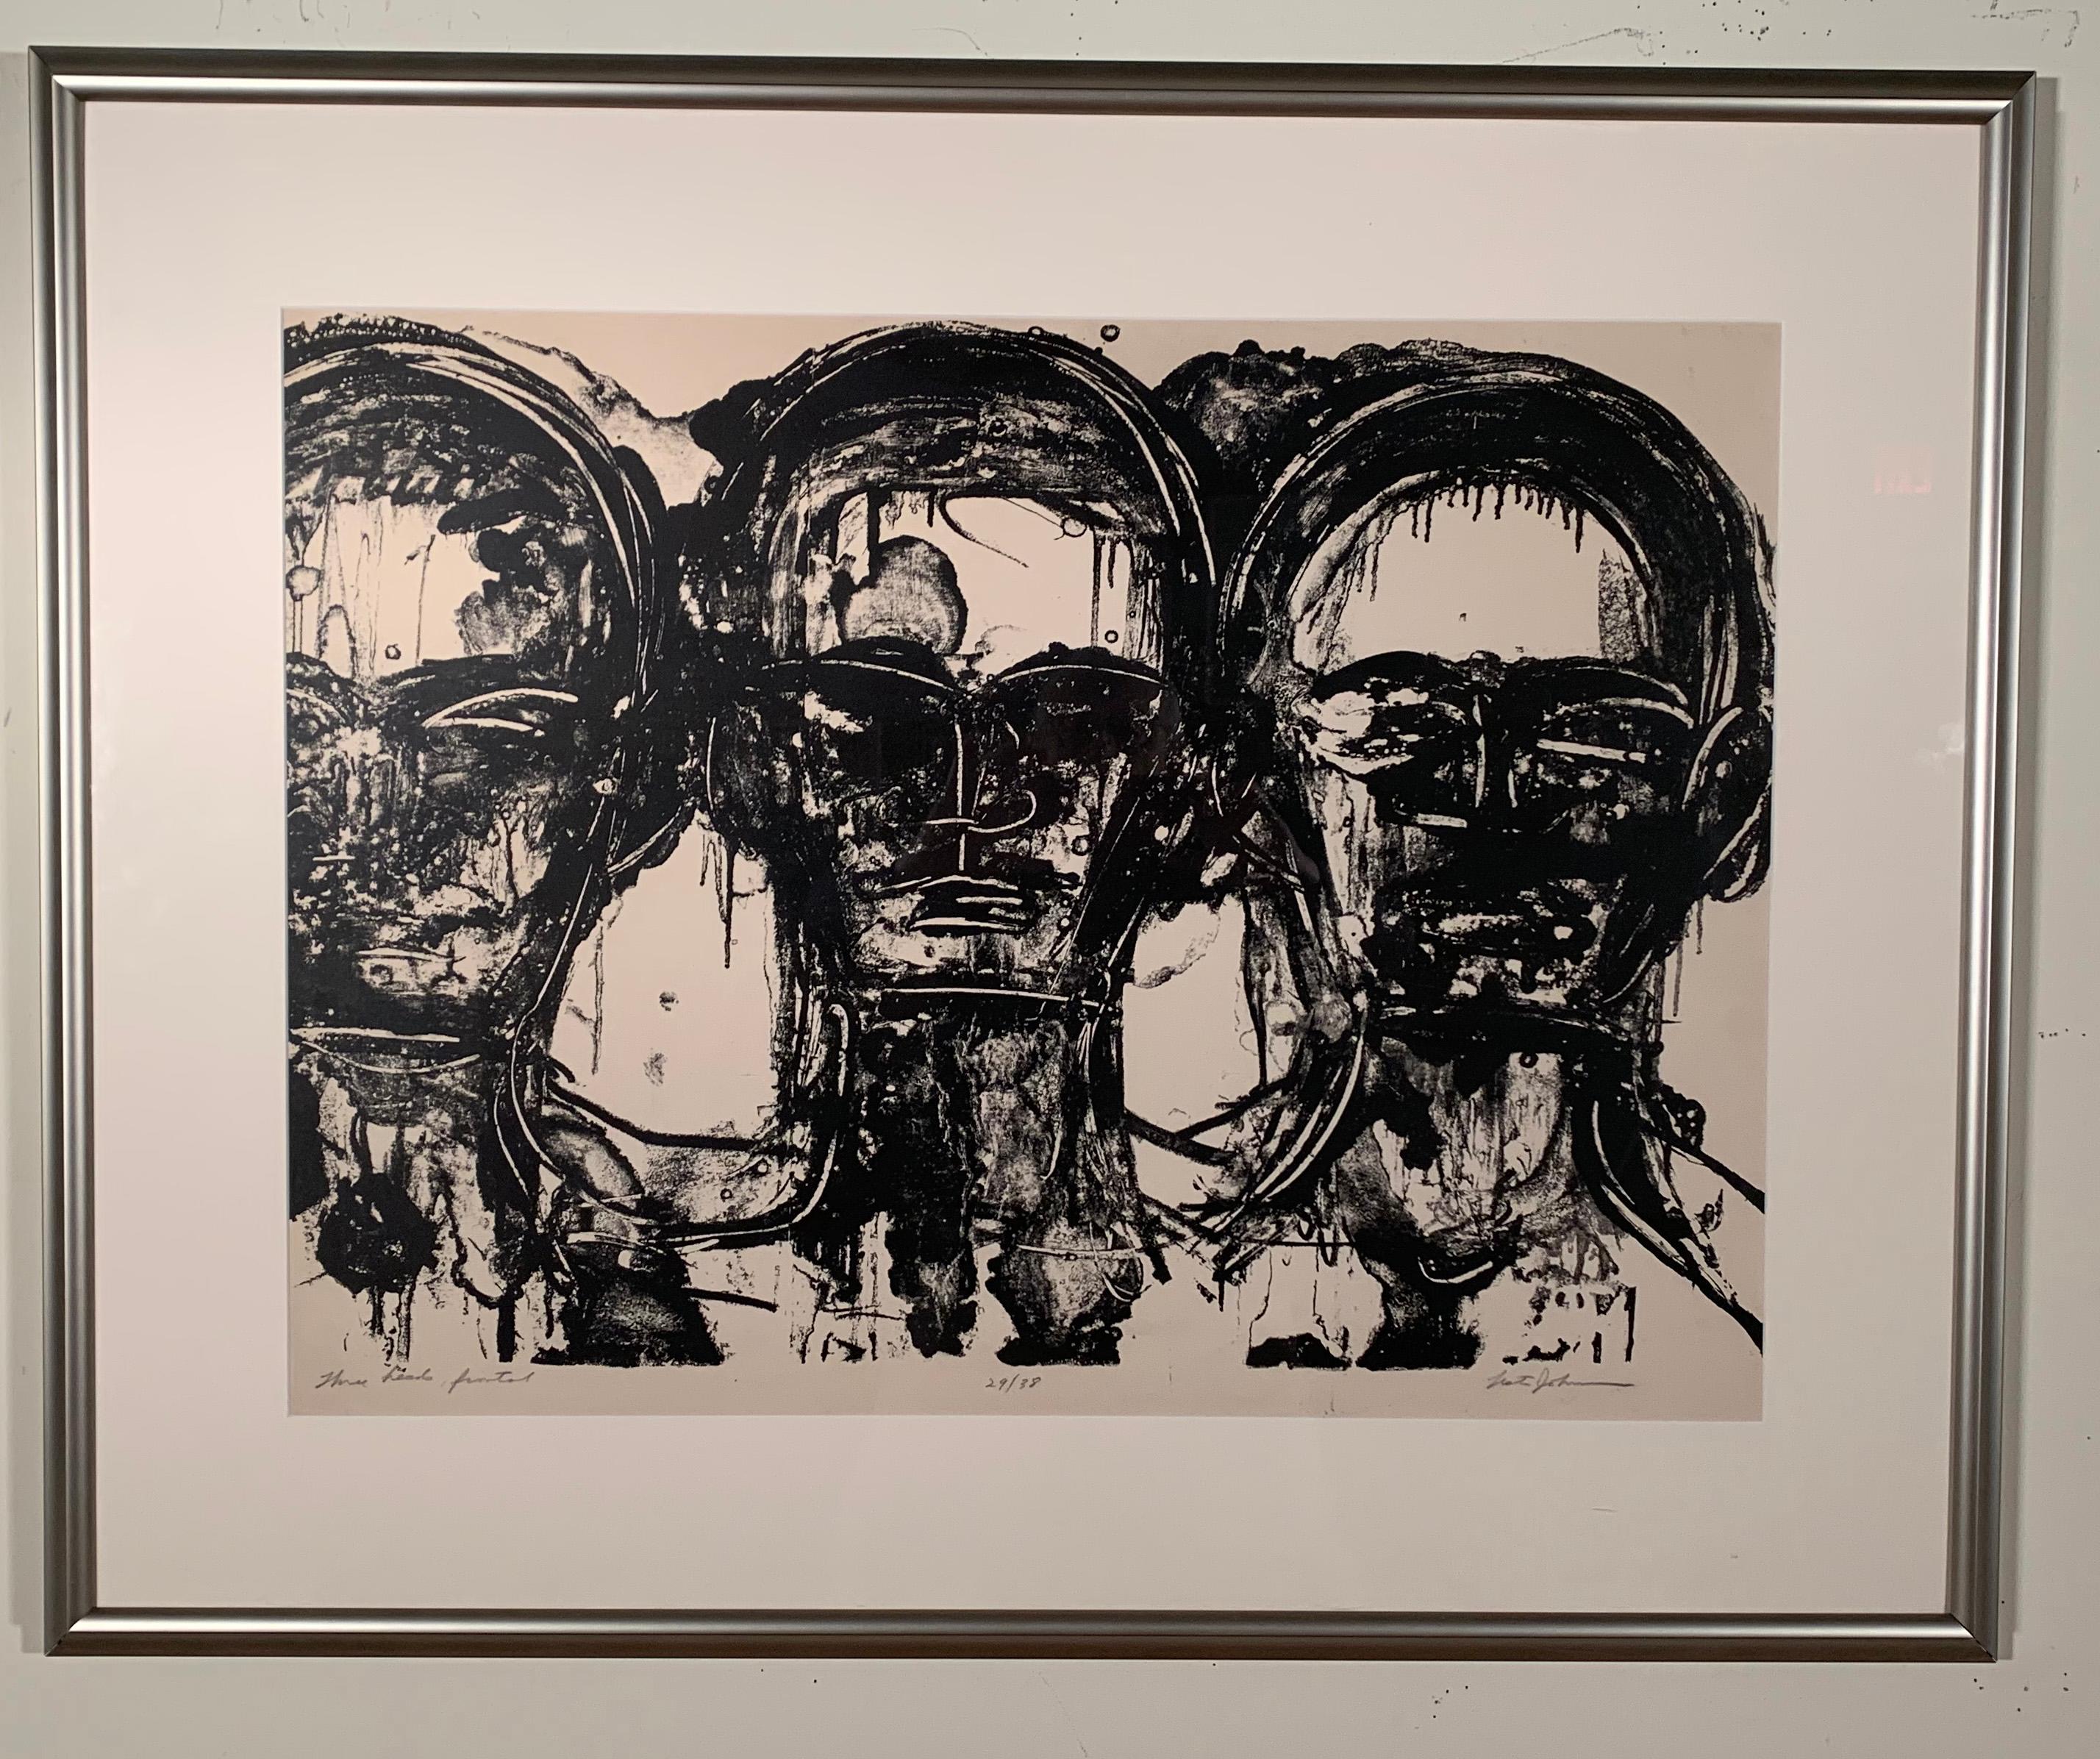 THREE HEADS - FRONTAL - Print by Lester Johnson